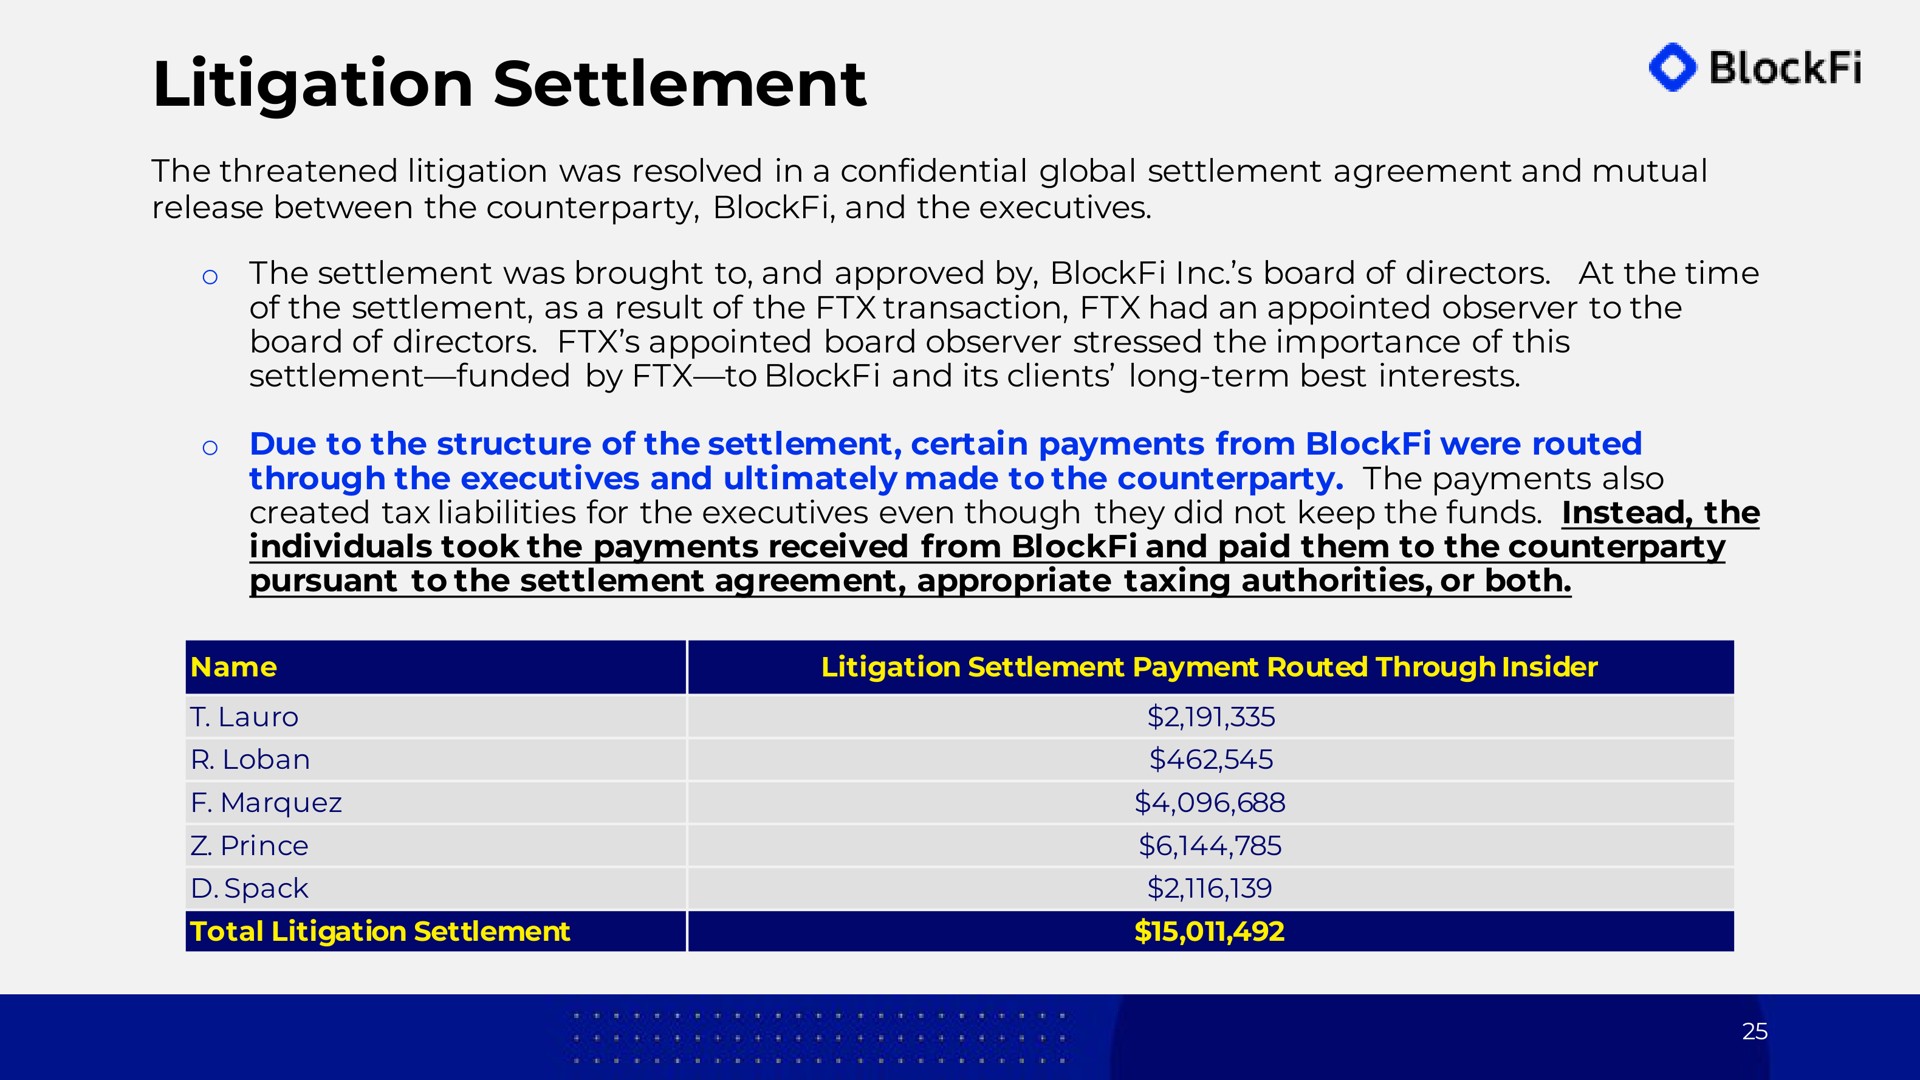 litigation settlement the threatened litigation was resolved in a confidential global settlement agreement and mutual release between the and the executives the settlement was brought to and approved by board of directors at the time of the settlement as a result of the transaction had an appointed observer to the board of directors appointed board observer stressed the importance of this settlement funded by to and its clients long term best interests due to the structure of the settlement certain payments from were routed through the executives and ultimately made to the the payments also created tax liabilities for the executives even though they did not keep the funds instead the individuals took the payments received from and paid them to the pursuant to the settlement agreement appropriate taxing authorities or both | BlockFi